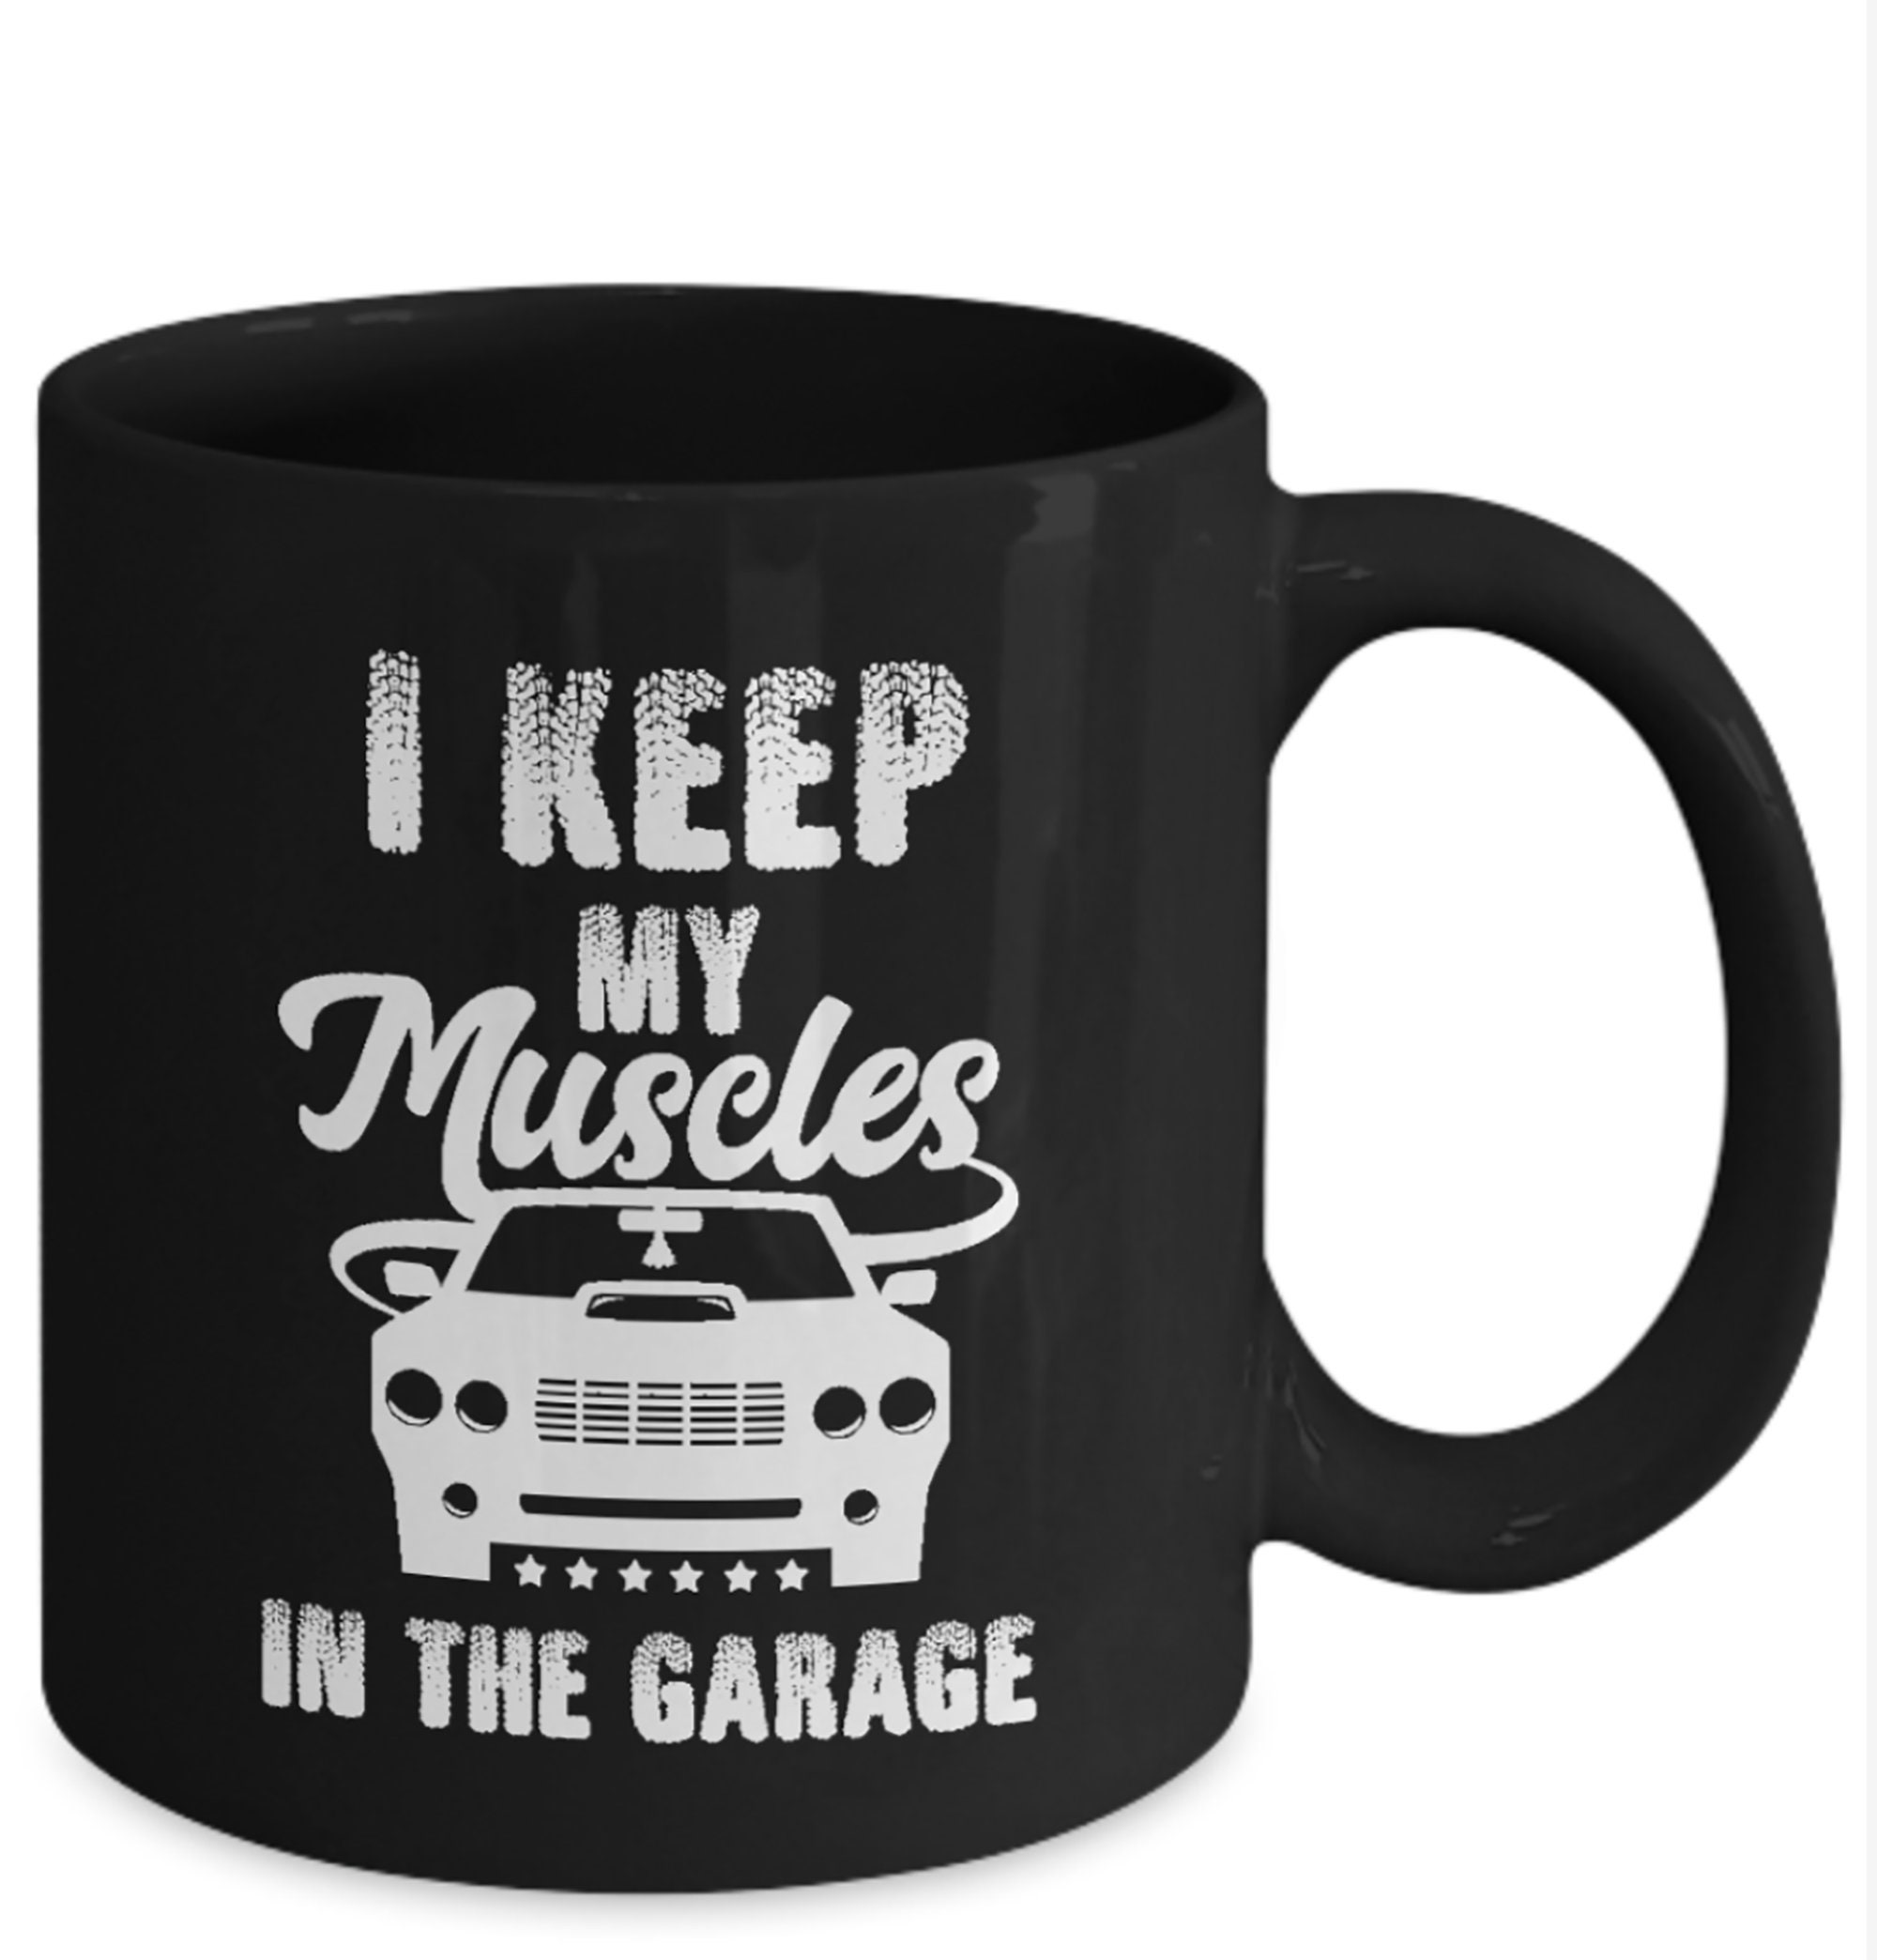 Funny Coffee Mugs, I Keep My Muscles in the Garage